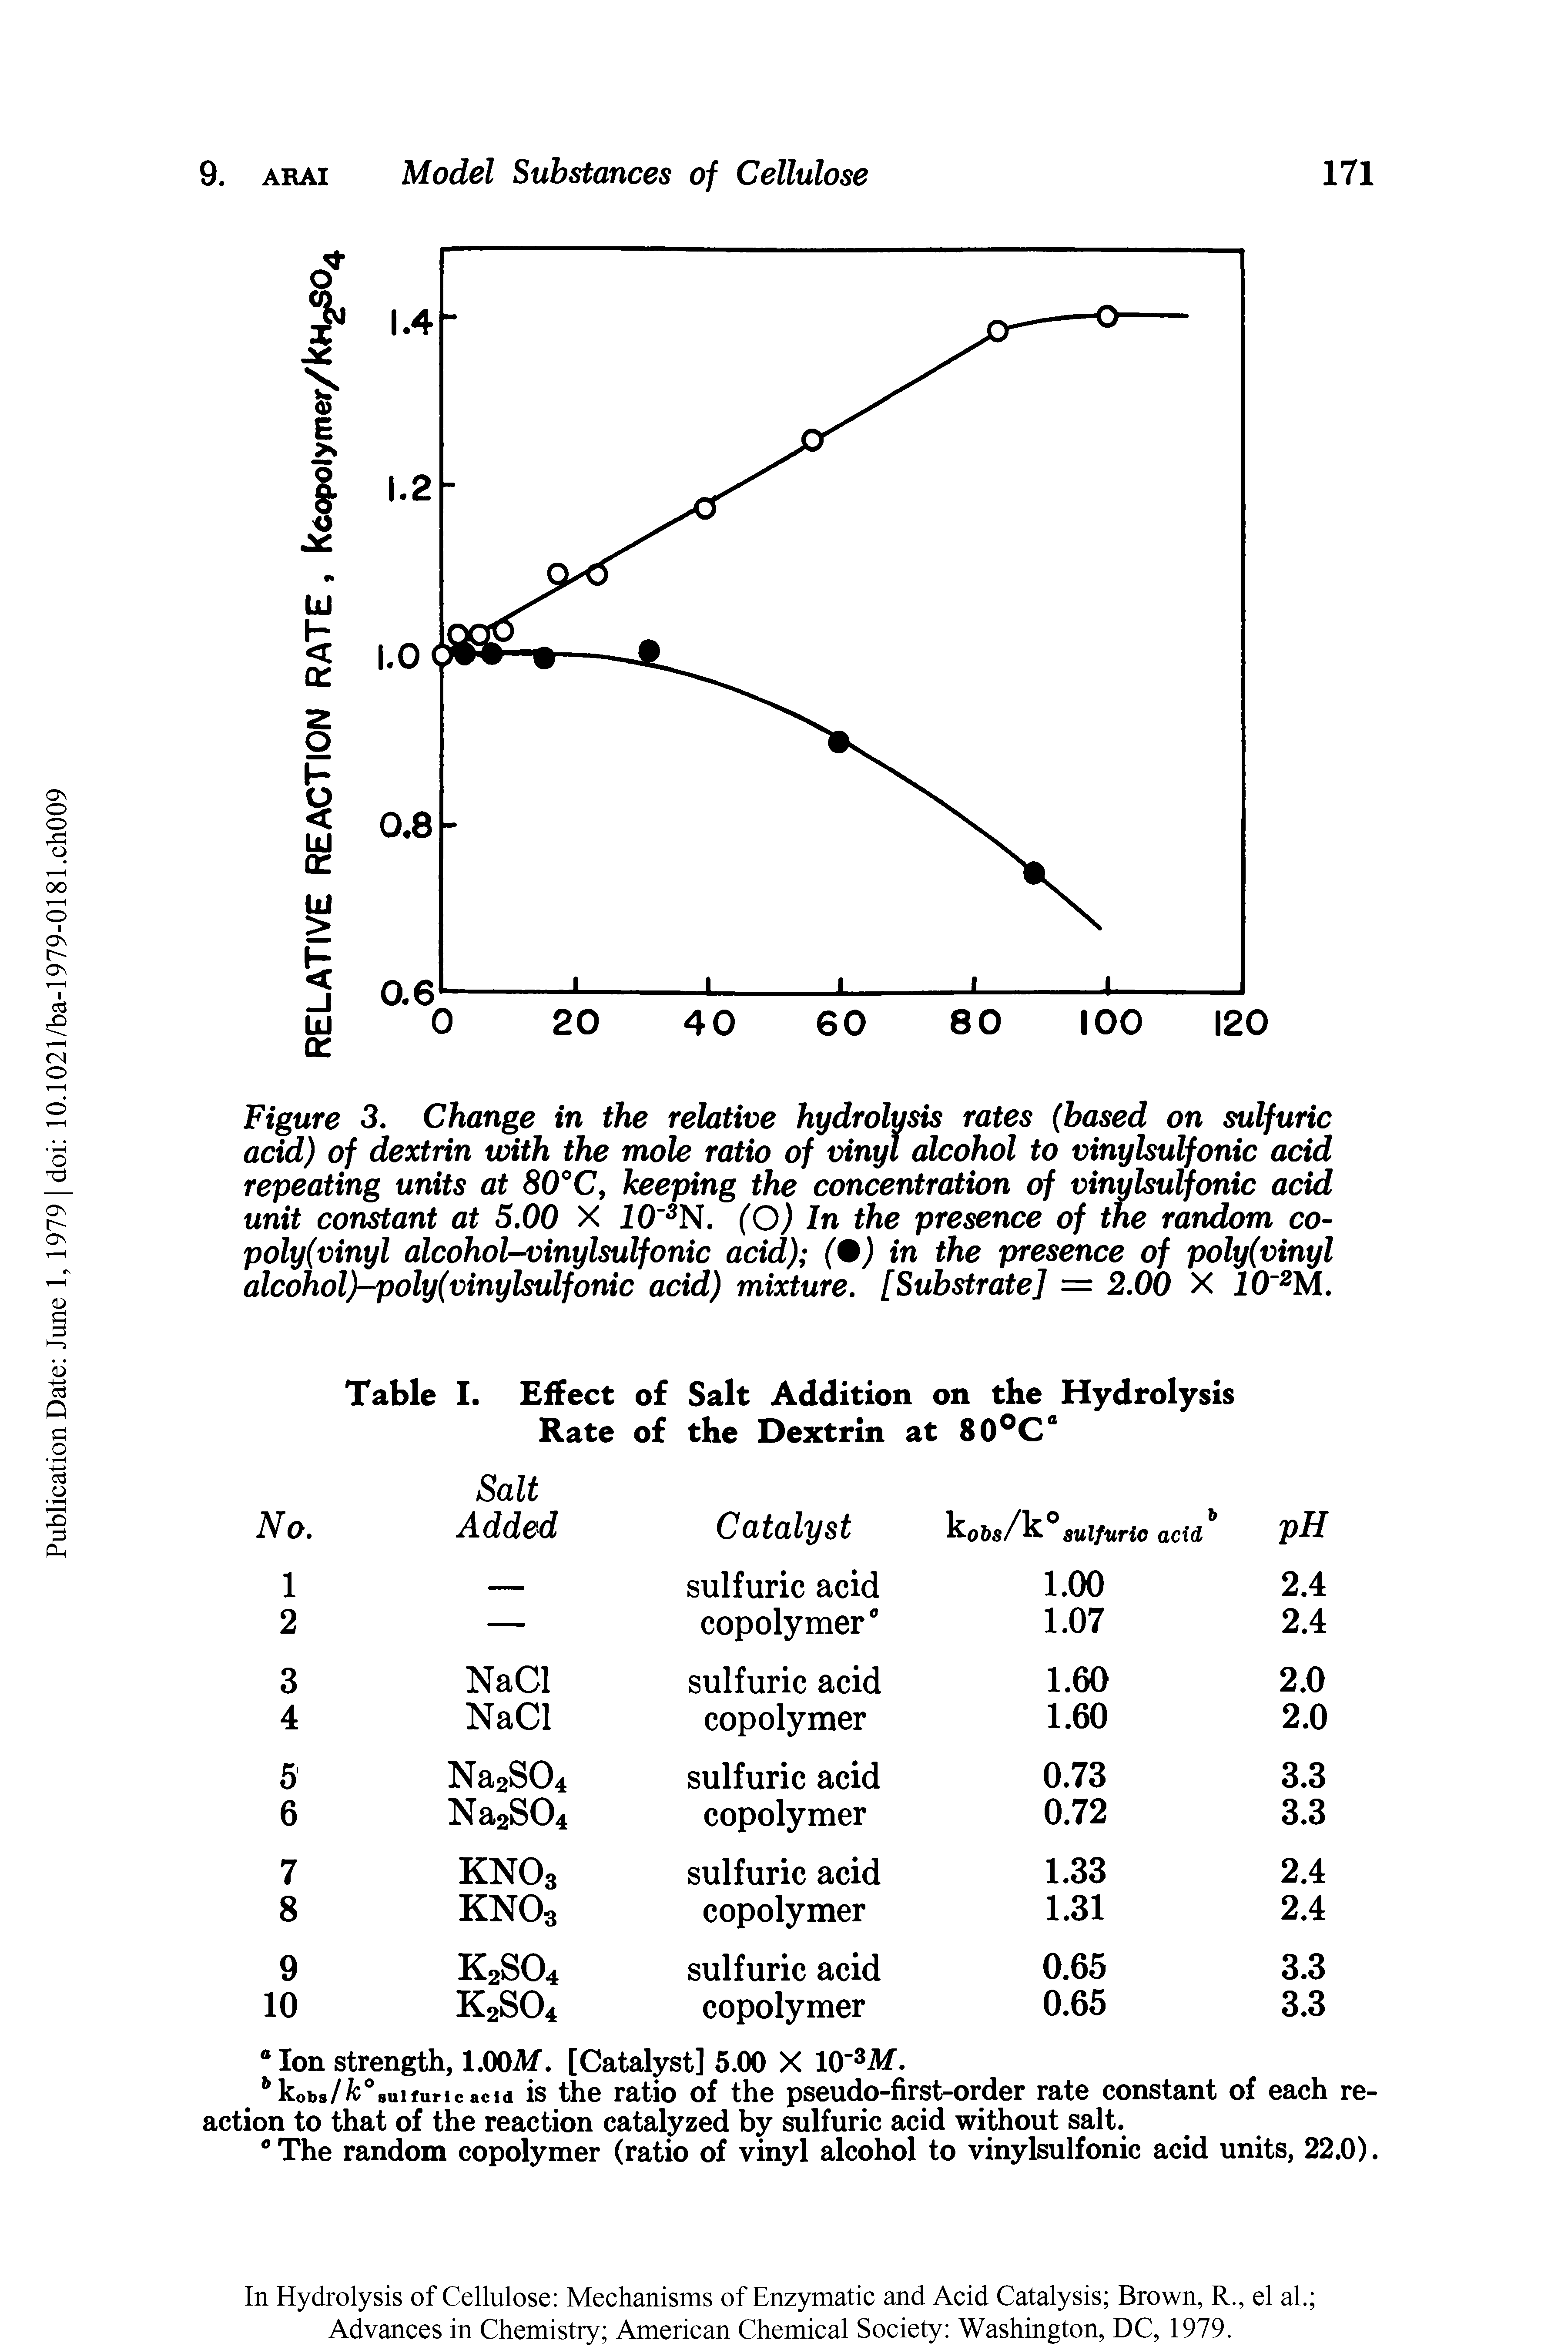 Figure 3. Change in the relative hydrolysis rates (based on sulfuric acid) of dextrin with the mole ratio of vinyl alcohol to vinylsulfonic acid repeating units at 80°C, keeping the concentration of vinulsulfonic acid unit constant at 5.00 X I0"3N. (O) In the presence of the random copoly (vinyl alcohol-vinylsulfonic acid) (%) in the presence of poly (vinyl alcohol)-poly(vinylsulfonic acid) mixture. [Substrate] = 2.00 X 10"2M.